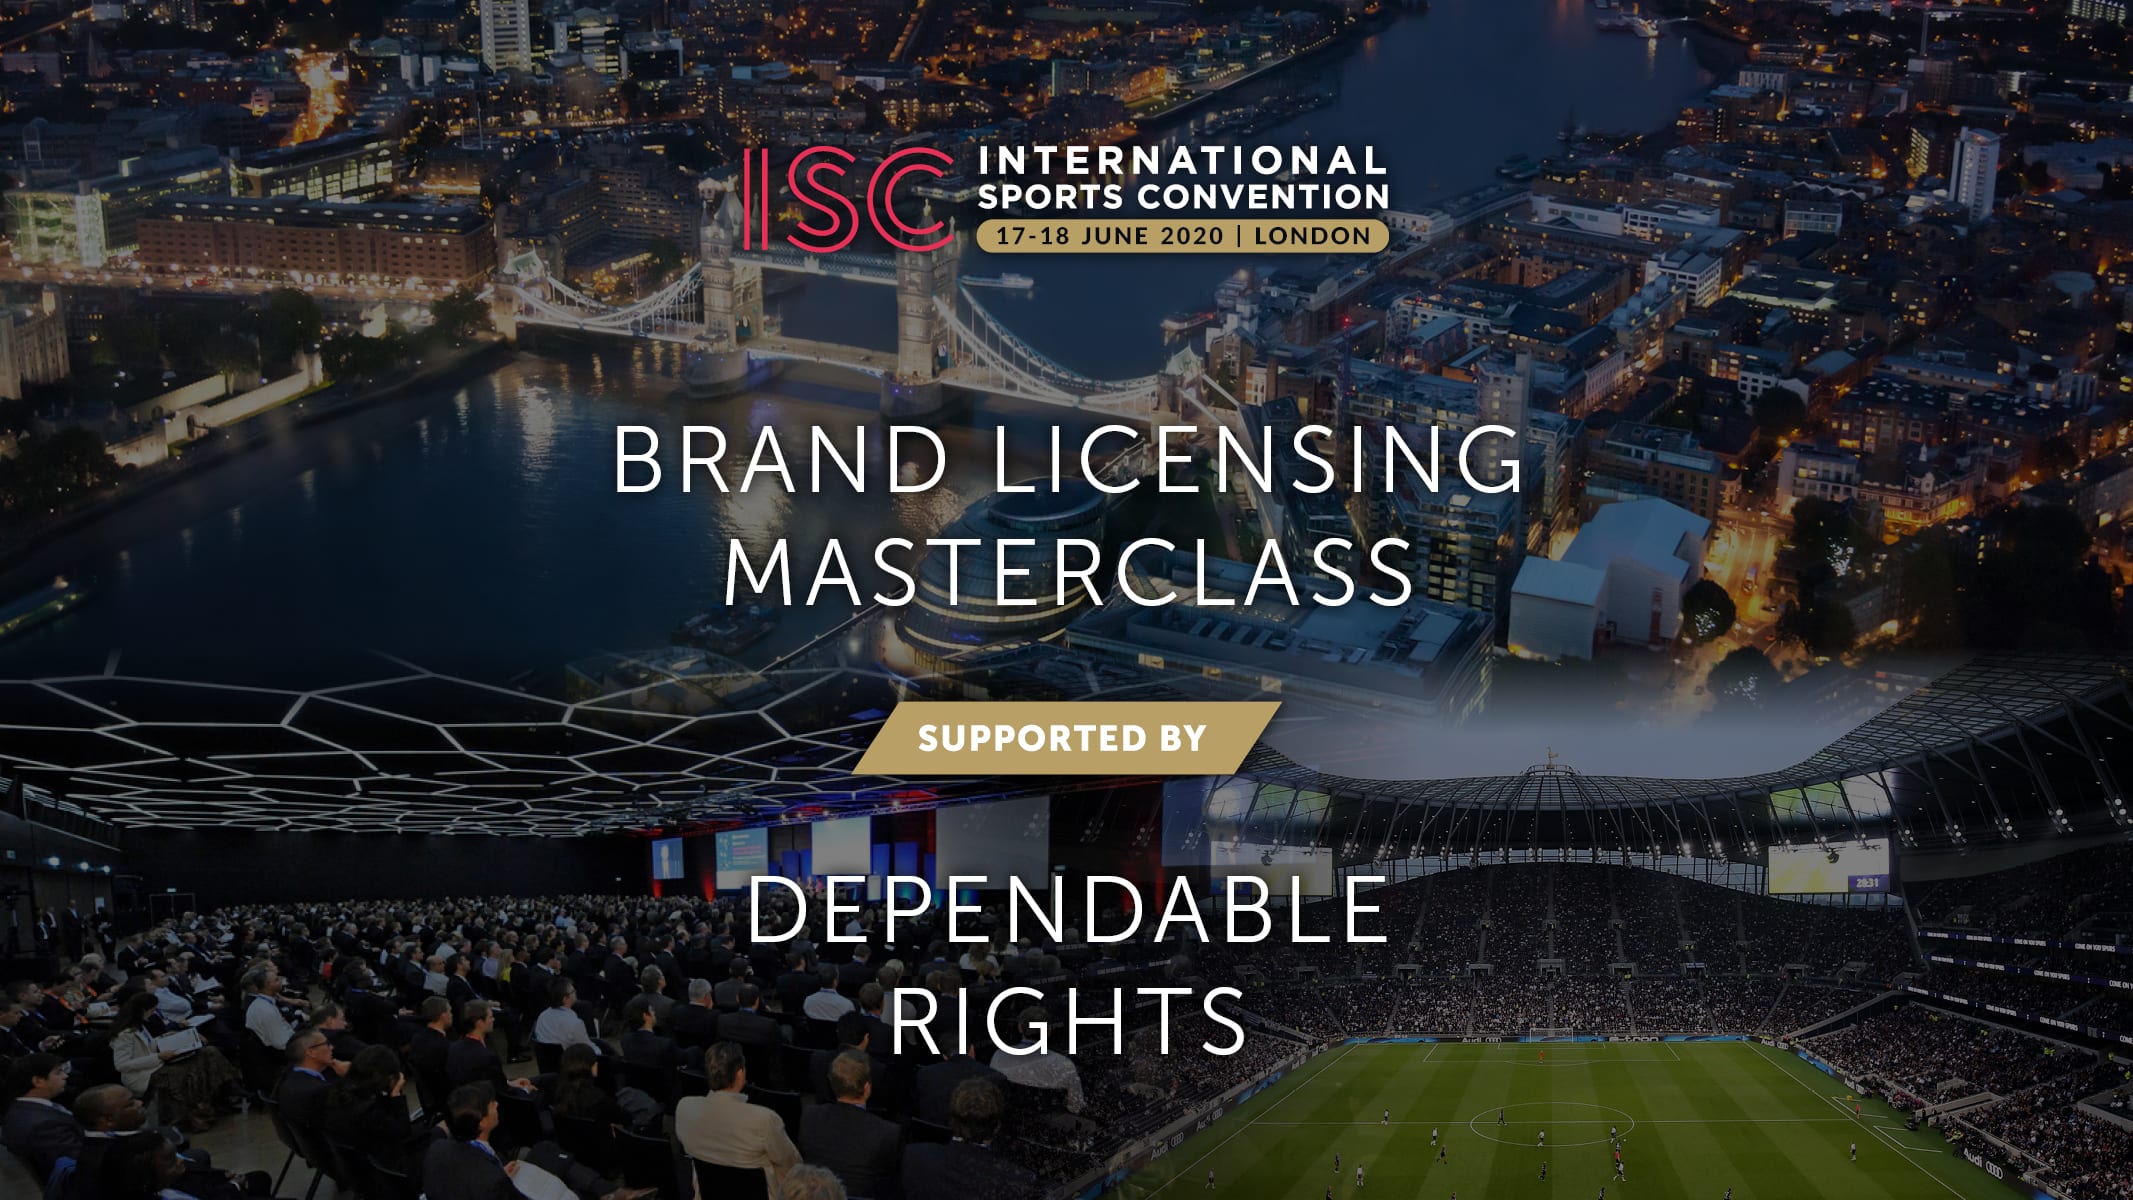 The International Sports Convention (ISC) and Dependable Solutions, Inc